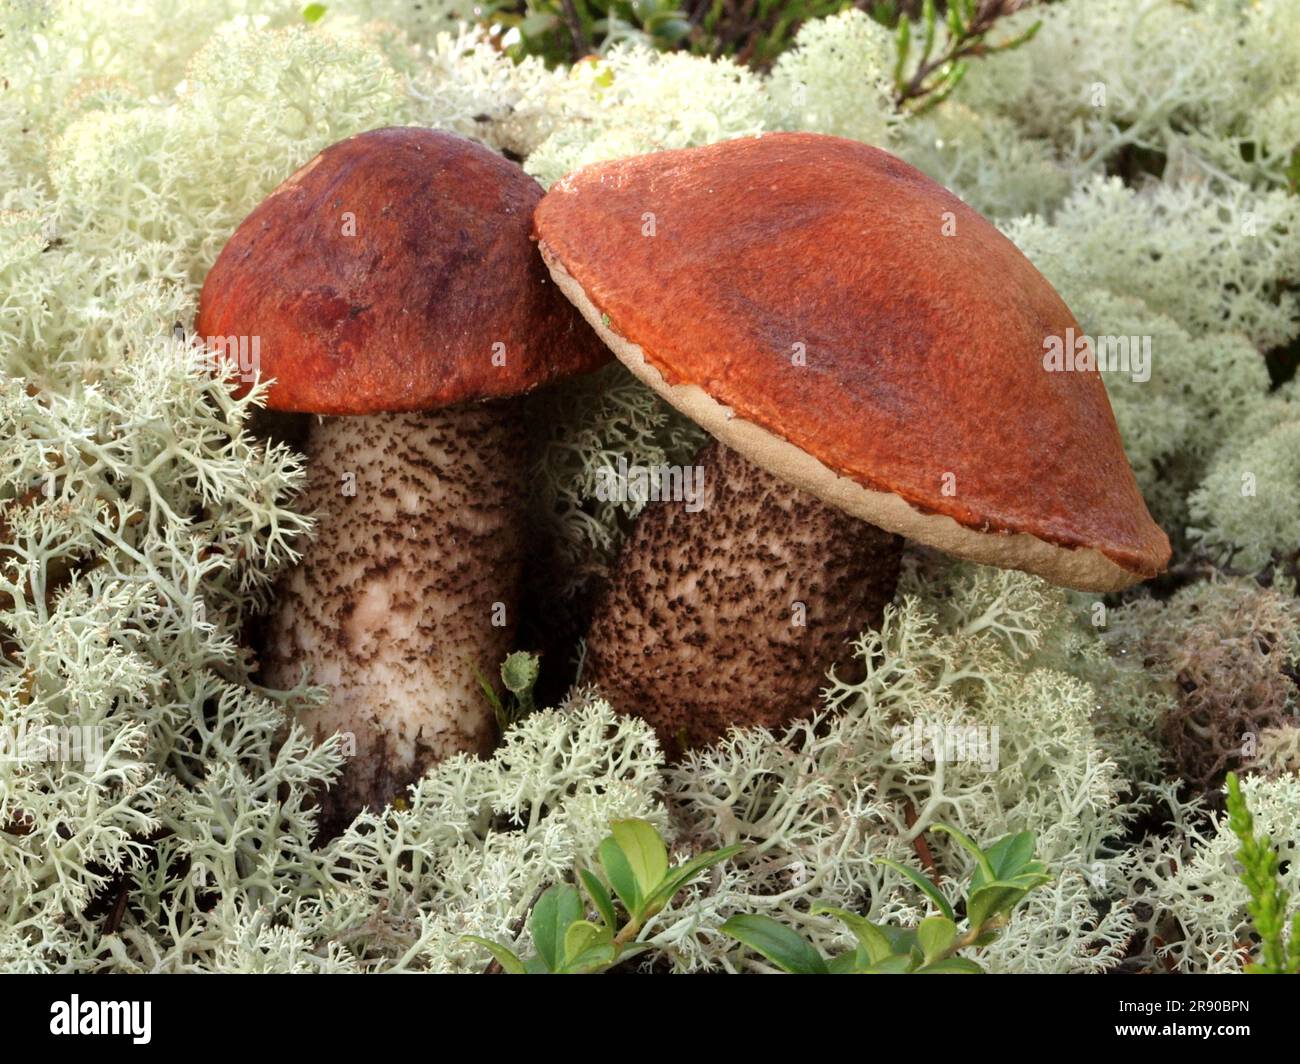 Leccinum vulpinum, commonly known as the foxy bolete, (3) is a bolete fungus in the genus Leccinum that is found in Europe. An edible species, it Stock Photo